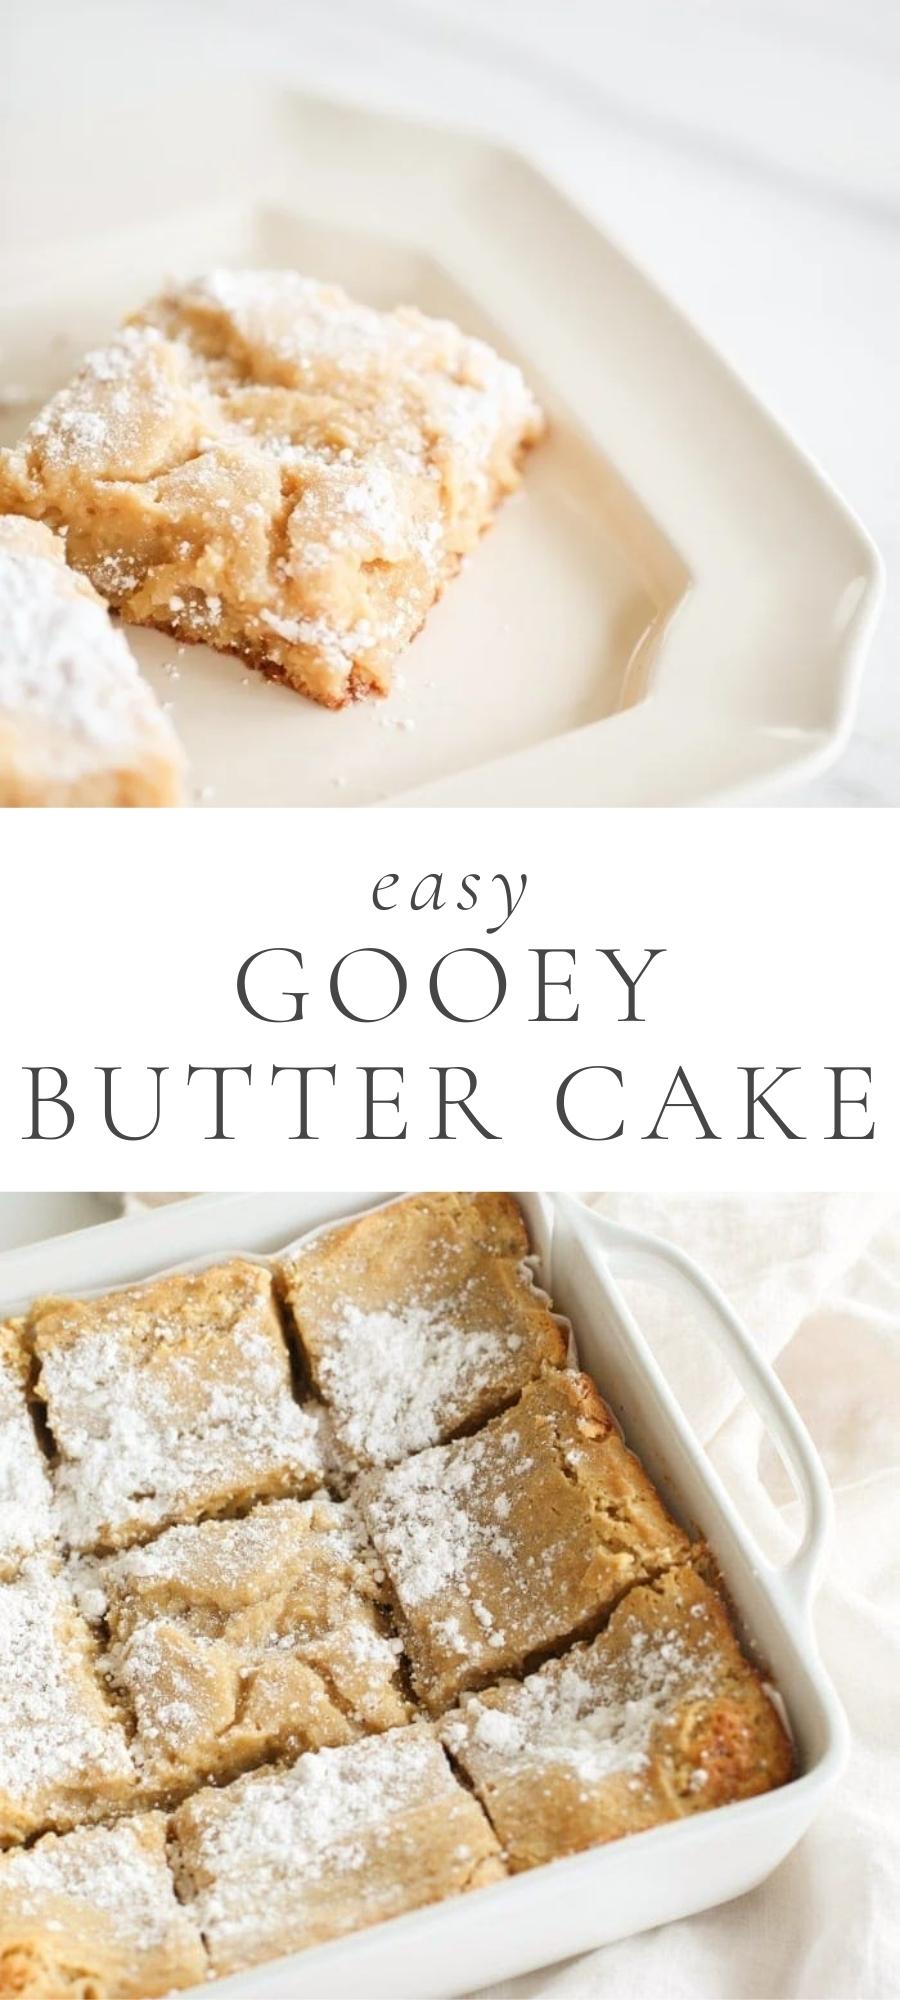 gooey butter cake in white plate and in baking pan